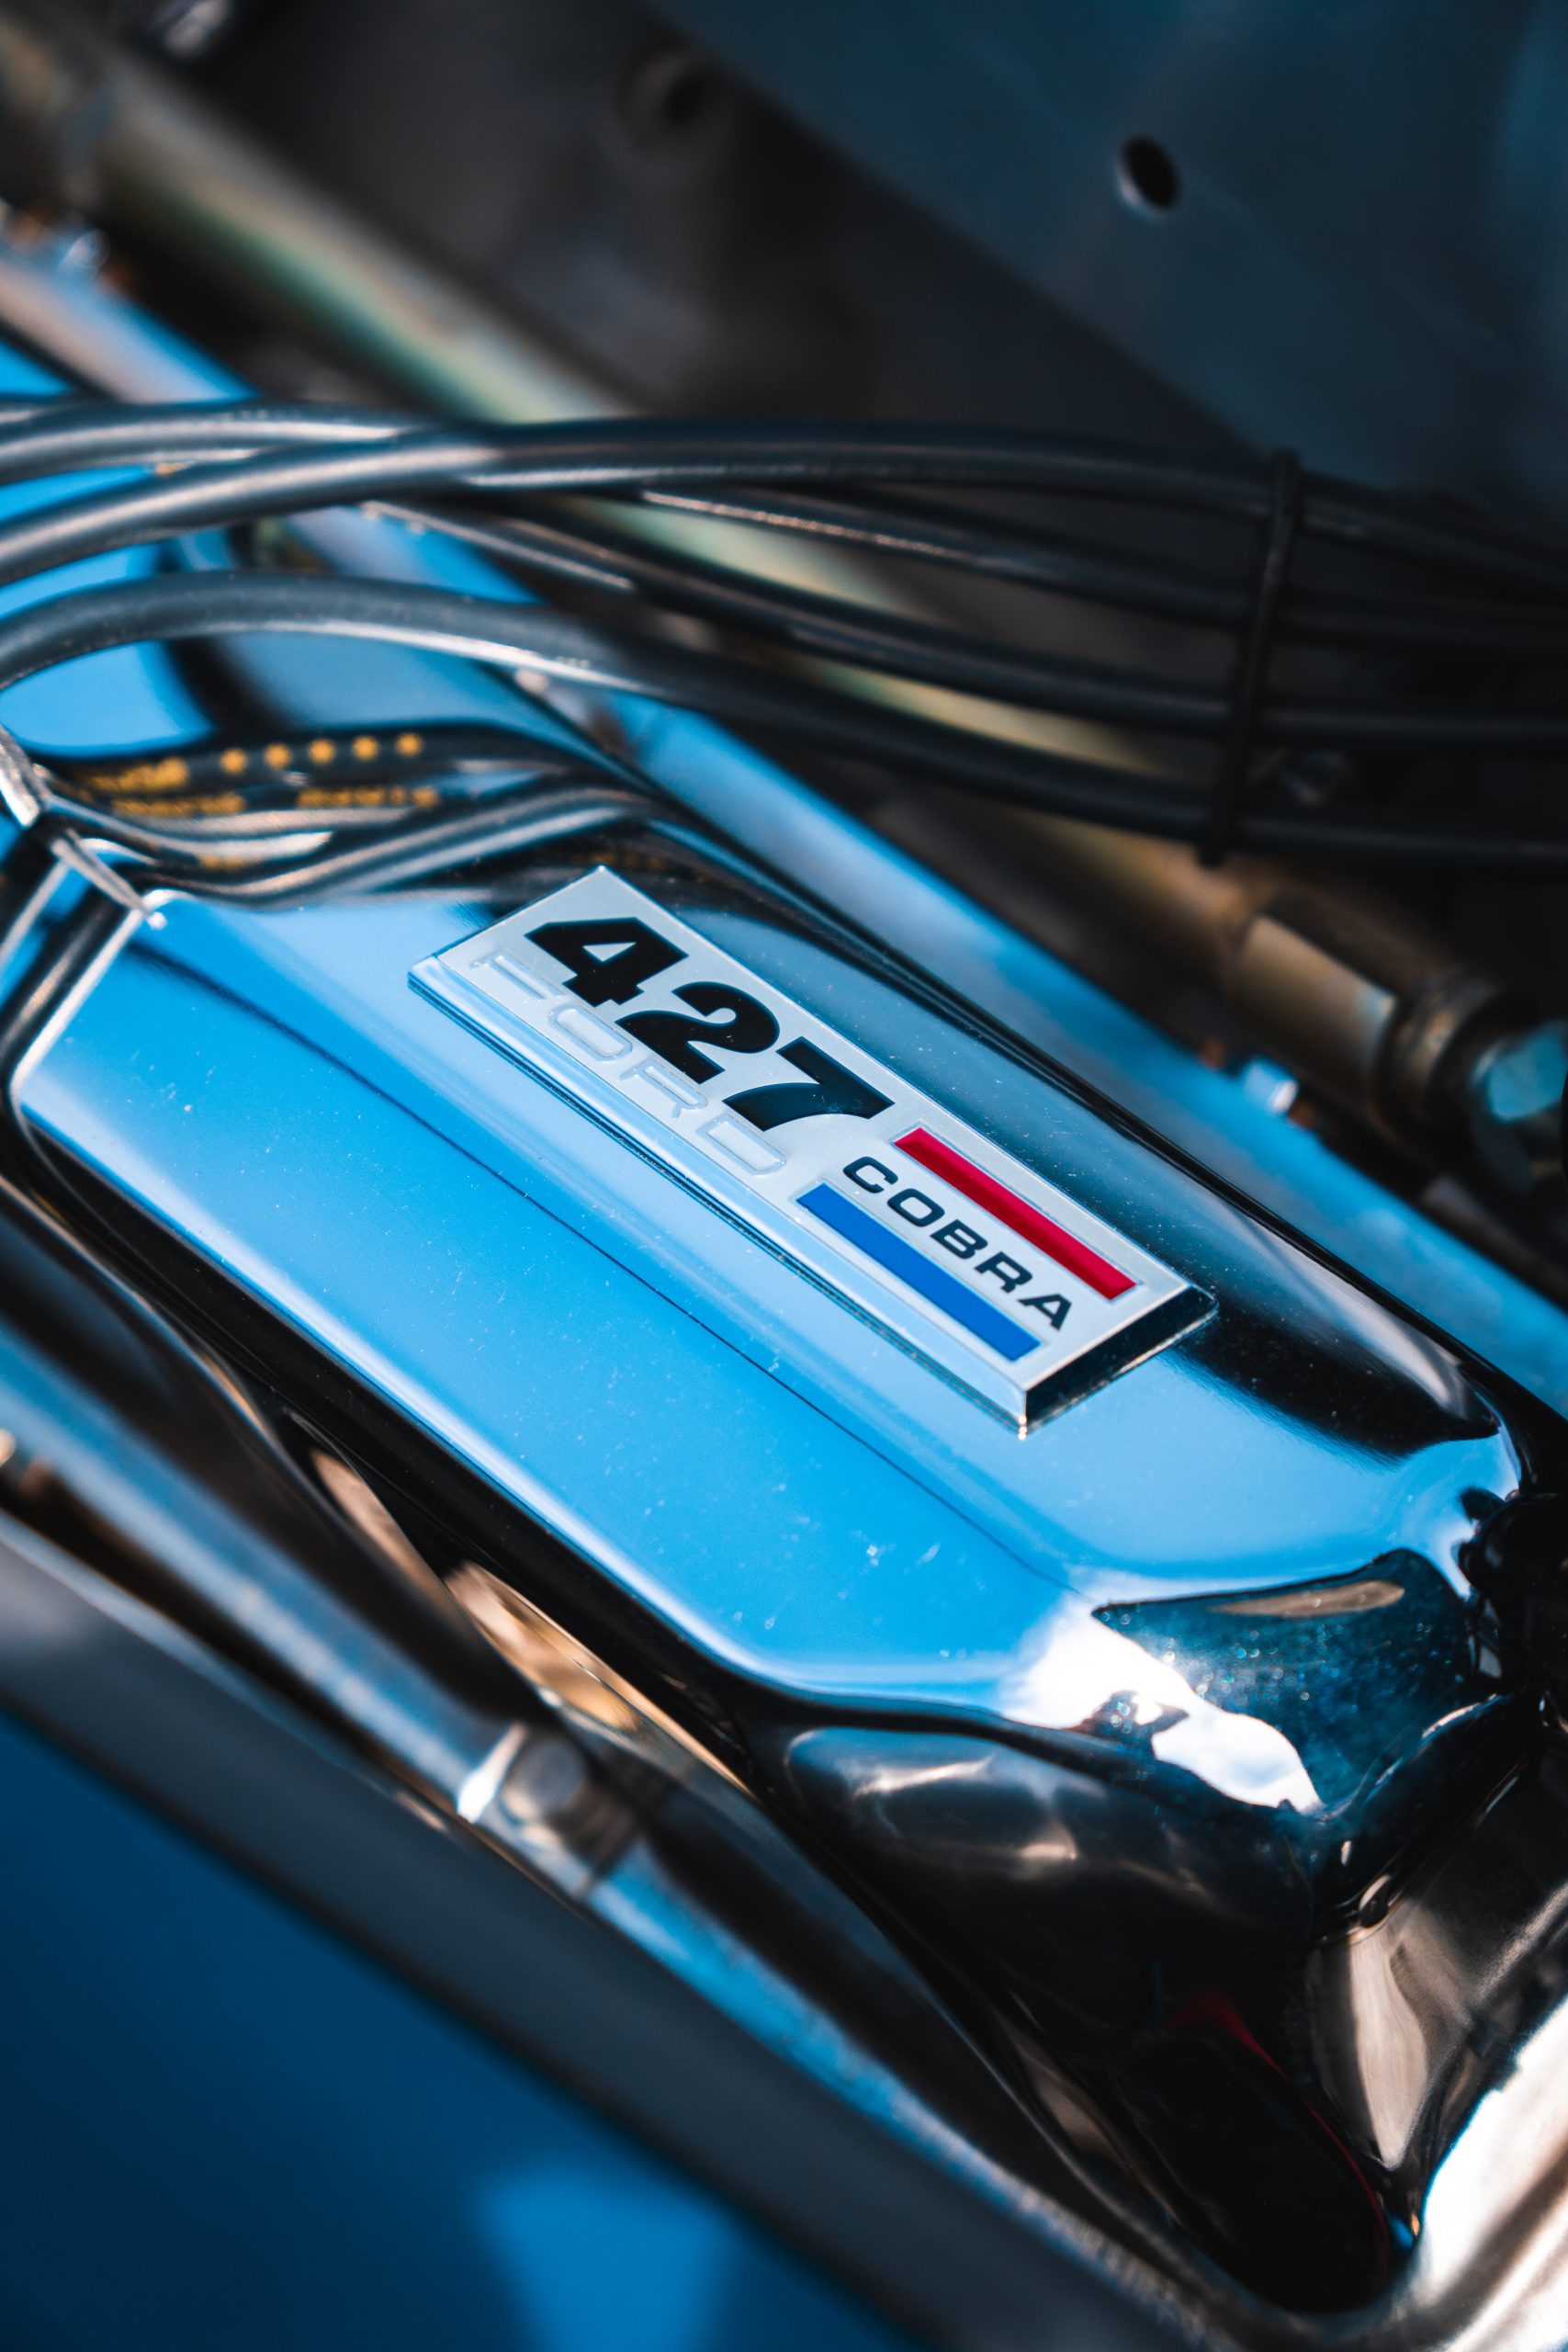 High-performance 427 Ford Cobra engine, renowned for power and reliability